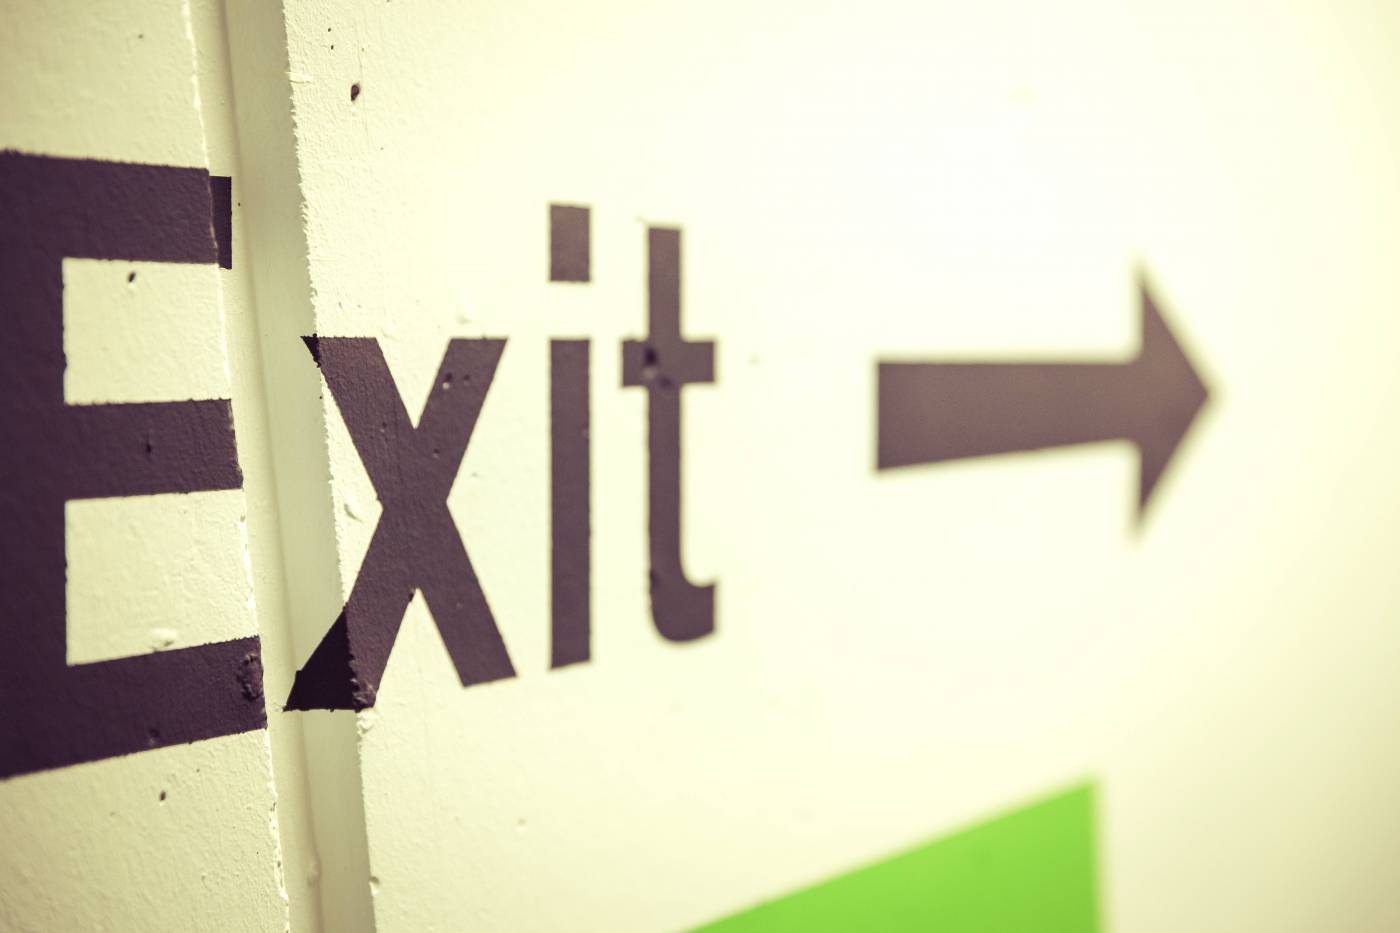 exit typography parkdeck sign/ picture